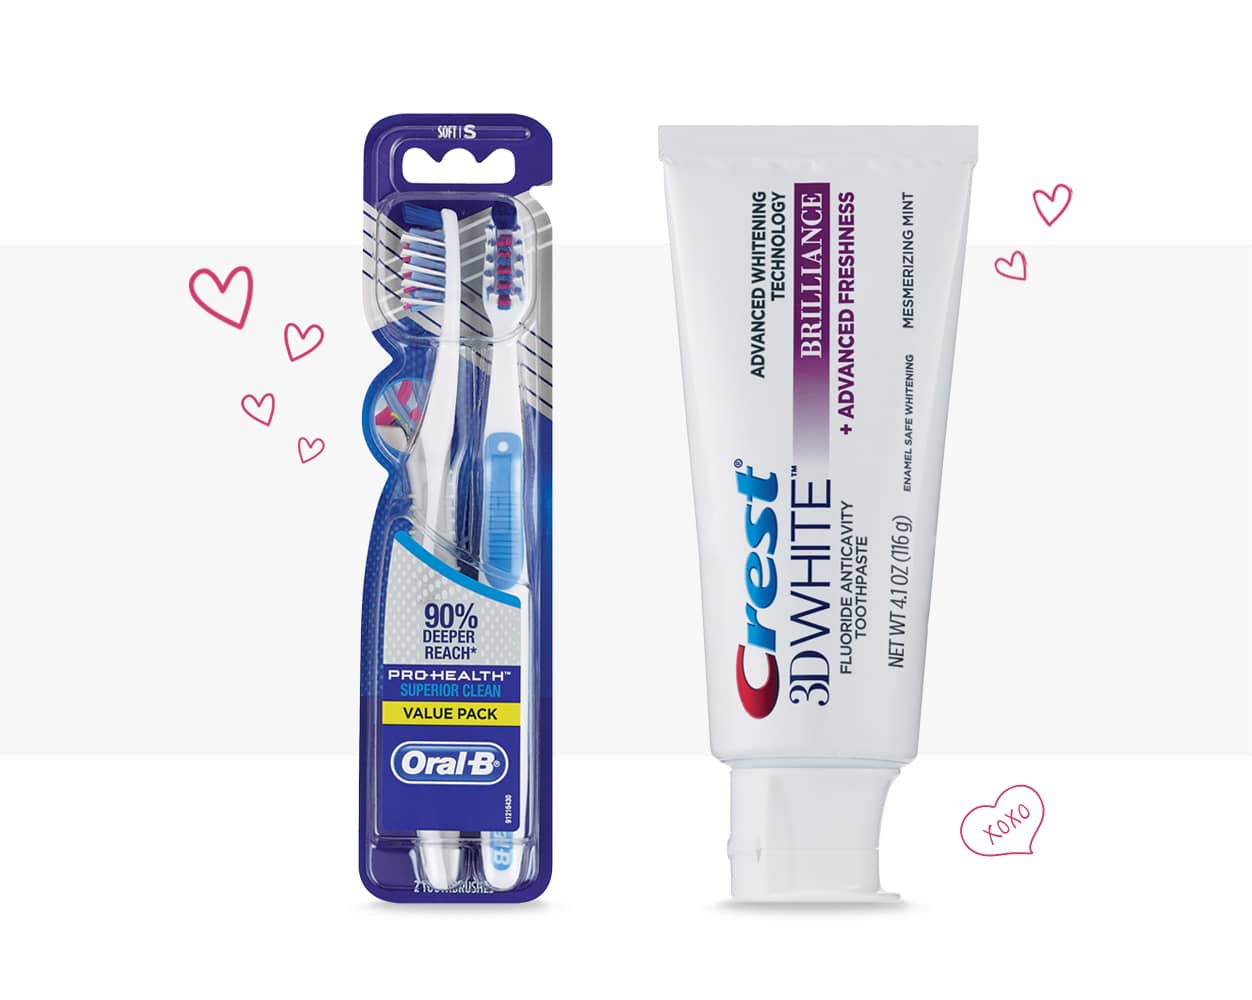 Shop for Crest and Oral-B oral care products